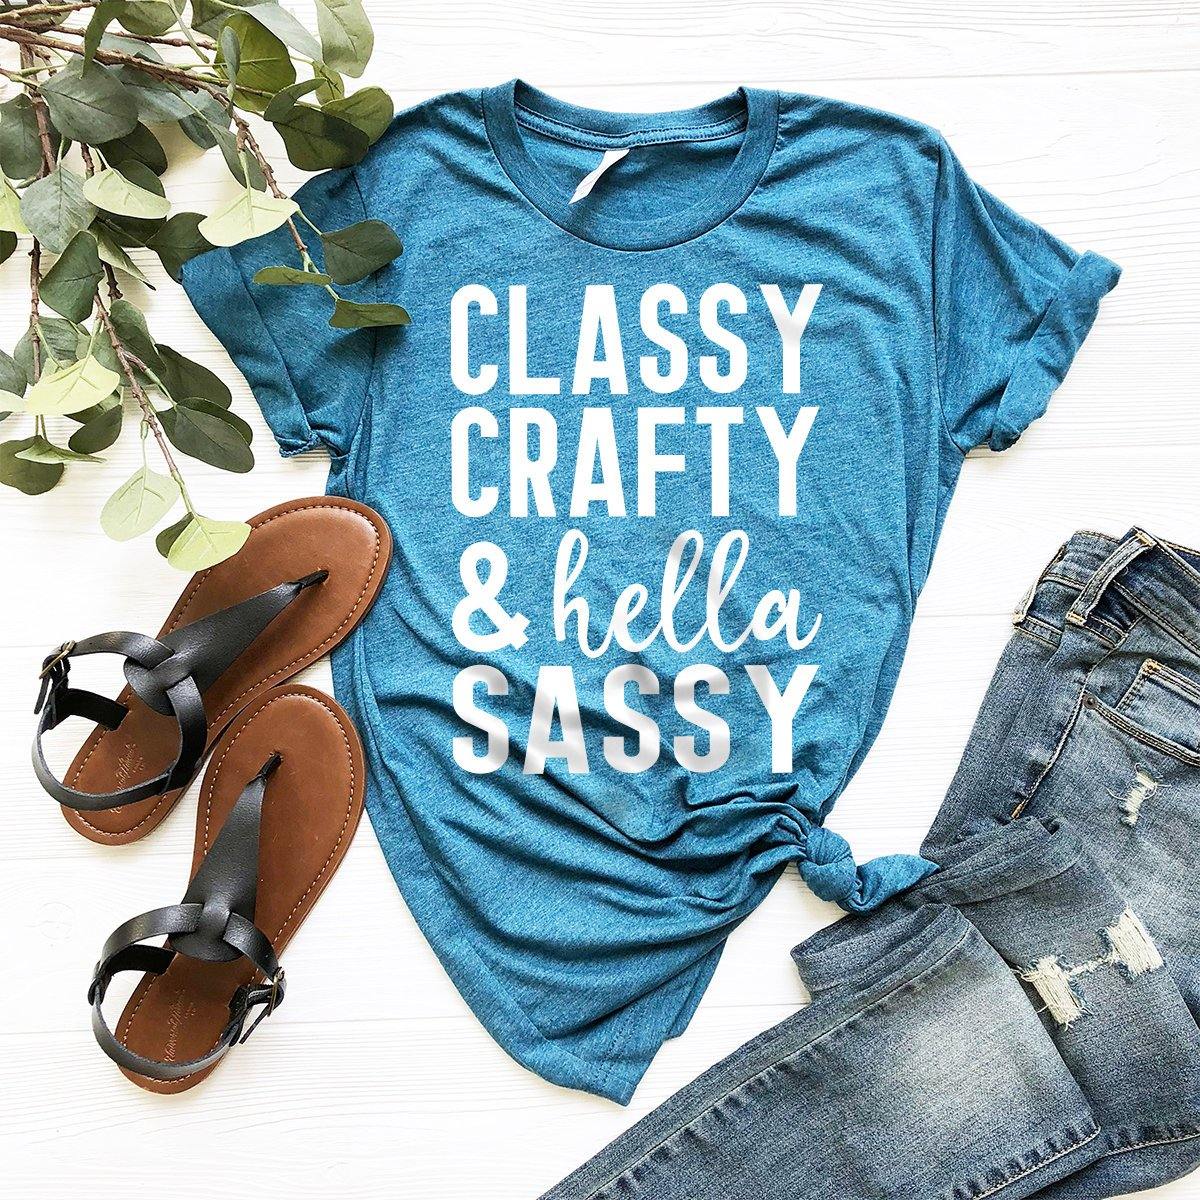 Classy Crafty And Hella Sassy Shirt, Gift For Crafter, Crafter T-Shirt, Funny Sarcasm Shirt, Humorous Quote Tee, Crafty Tee - Fastdeliverytees.com